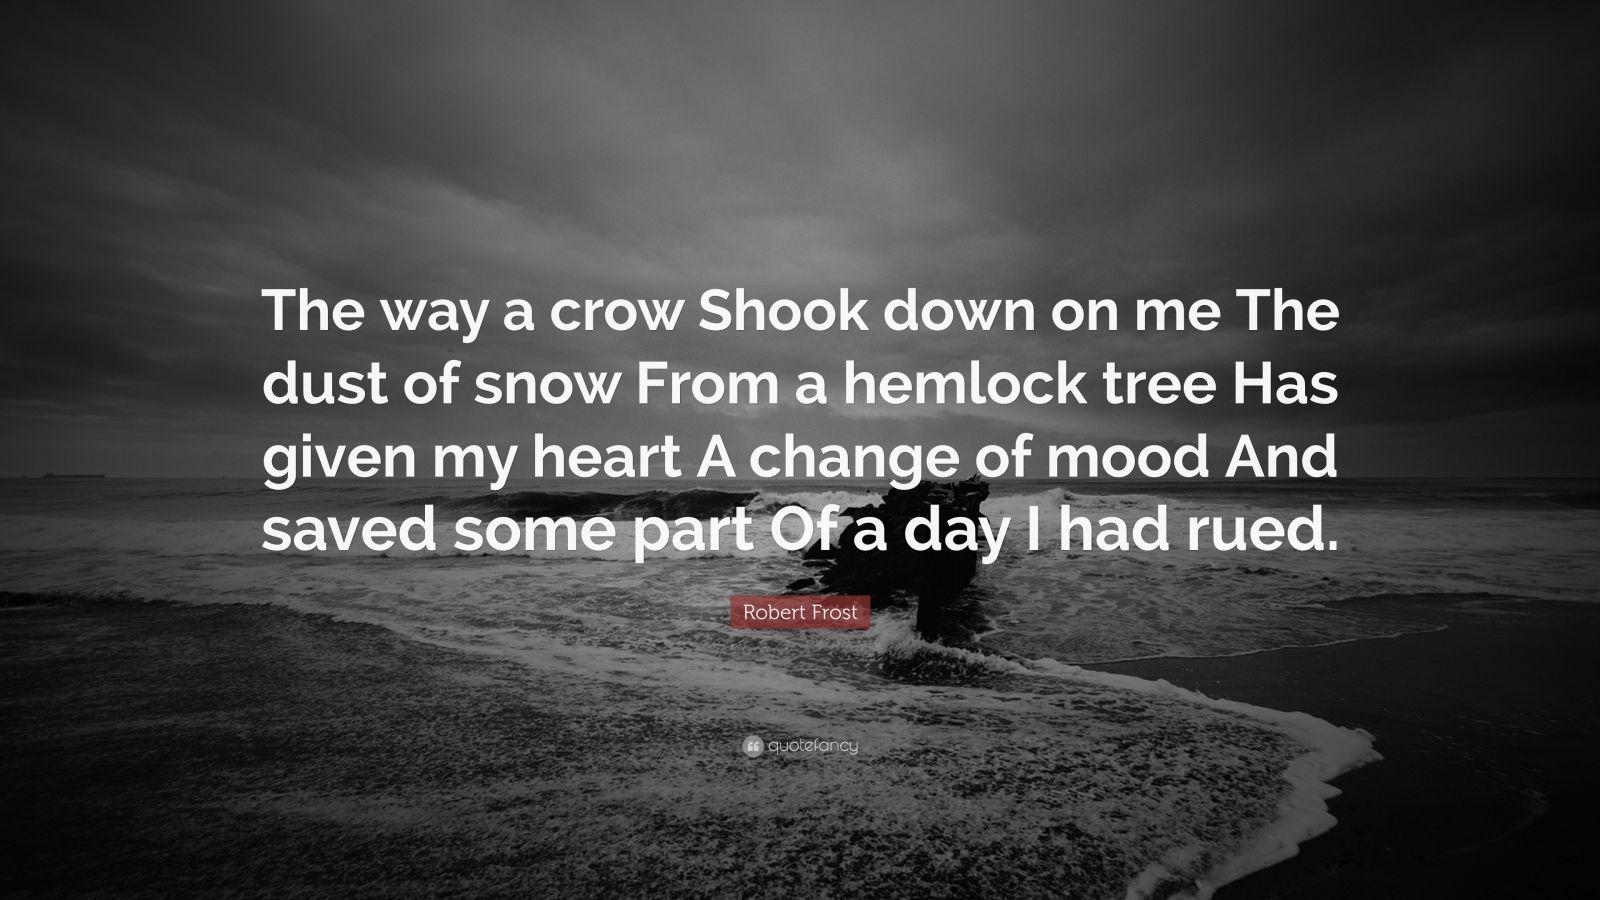 Robert Frost Quote: “The way a crow Shook down on me